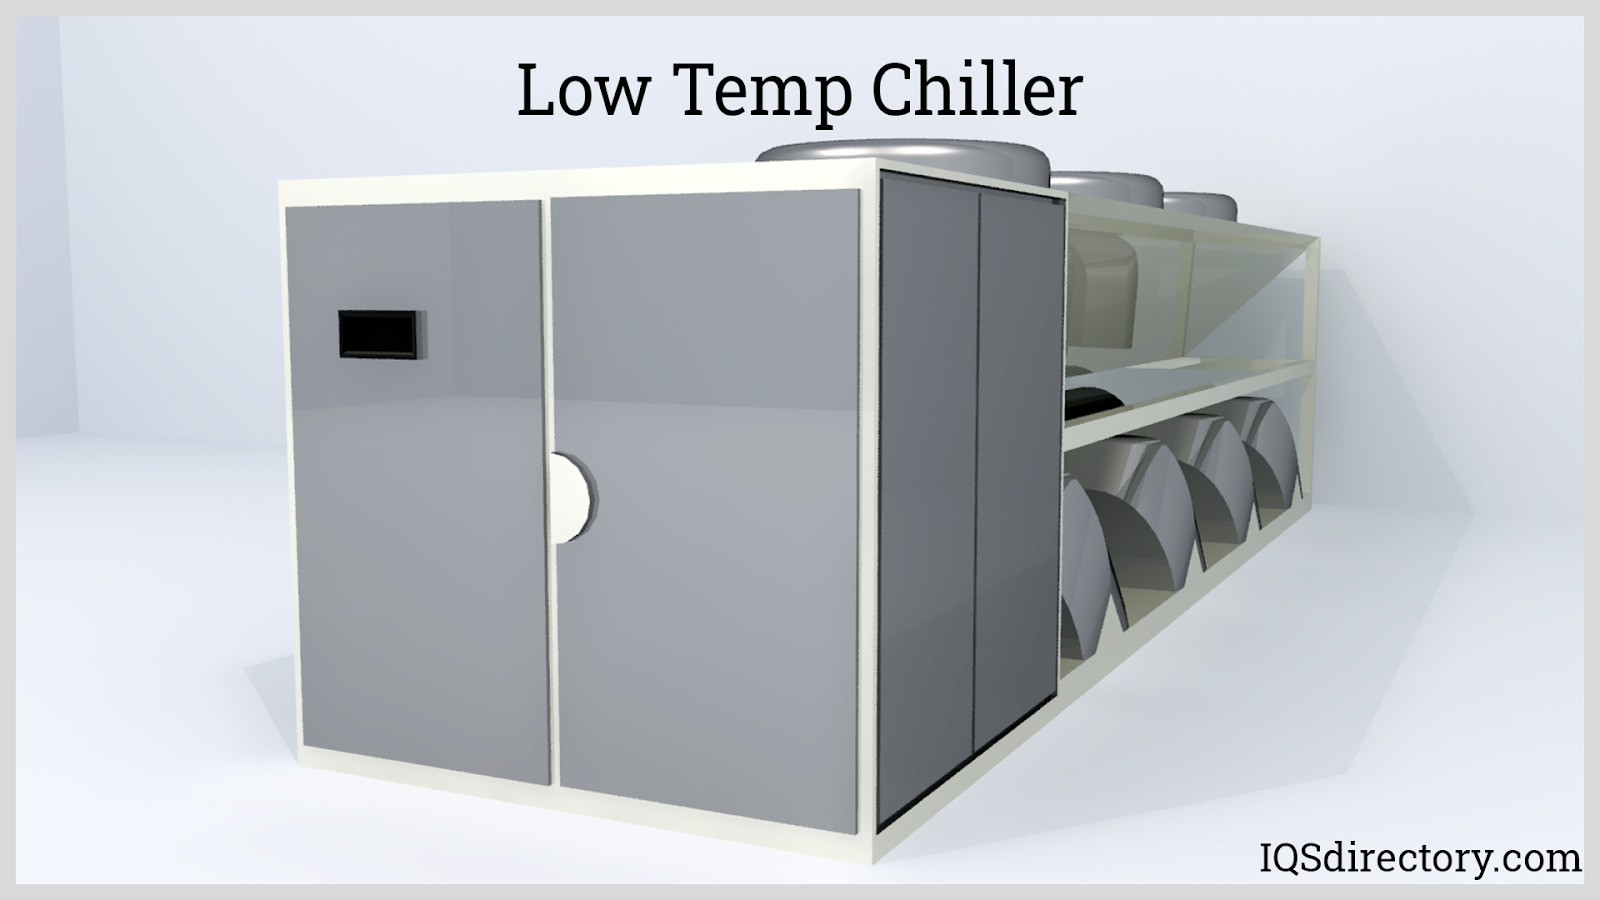 Low Temp Chiller